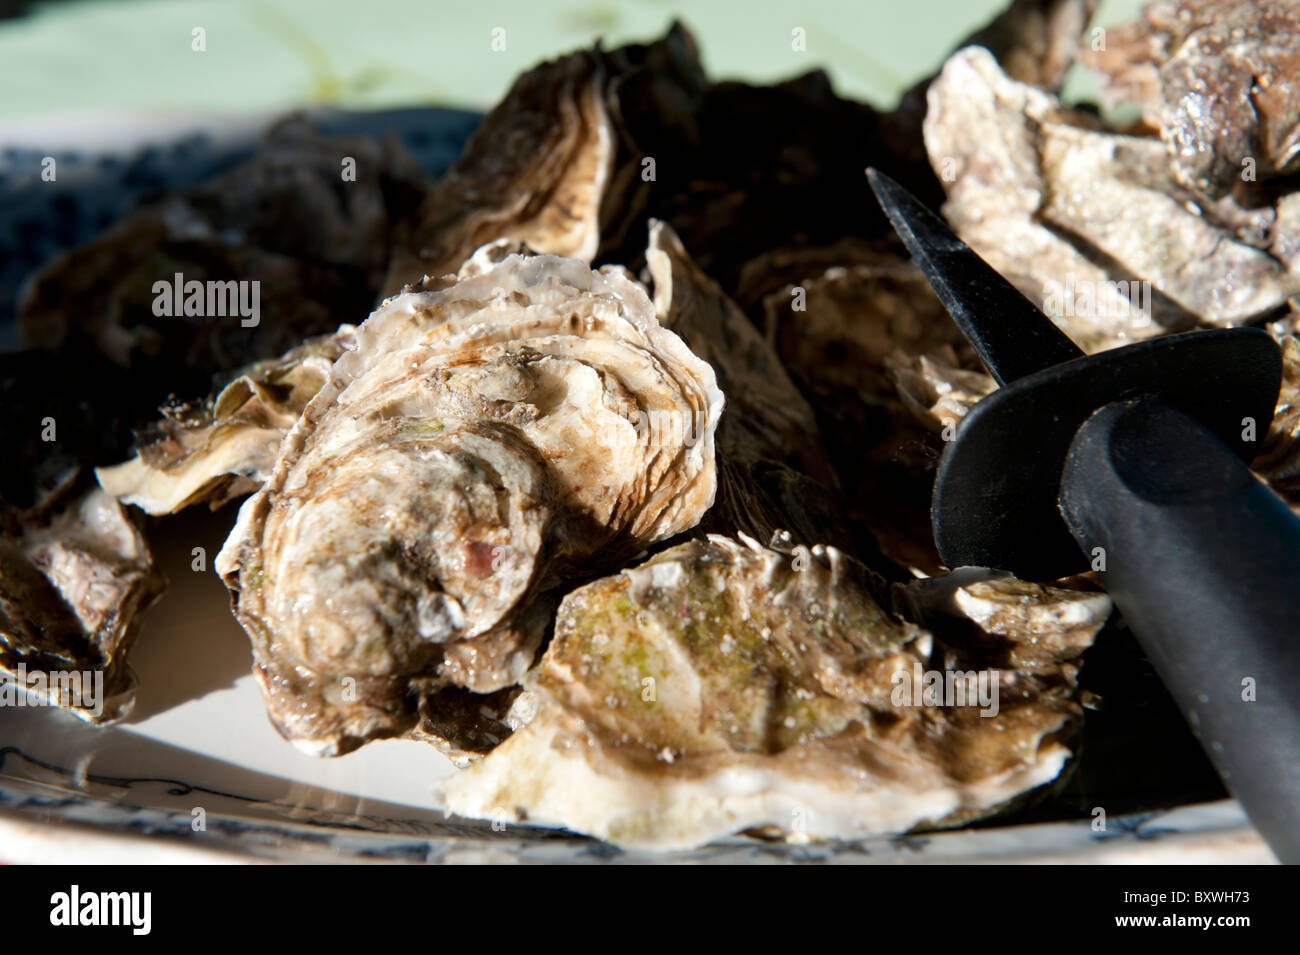 Stock photo of Oysters on a plate, open and ready for serving. Stock Photo